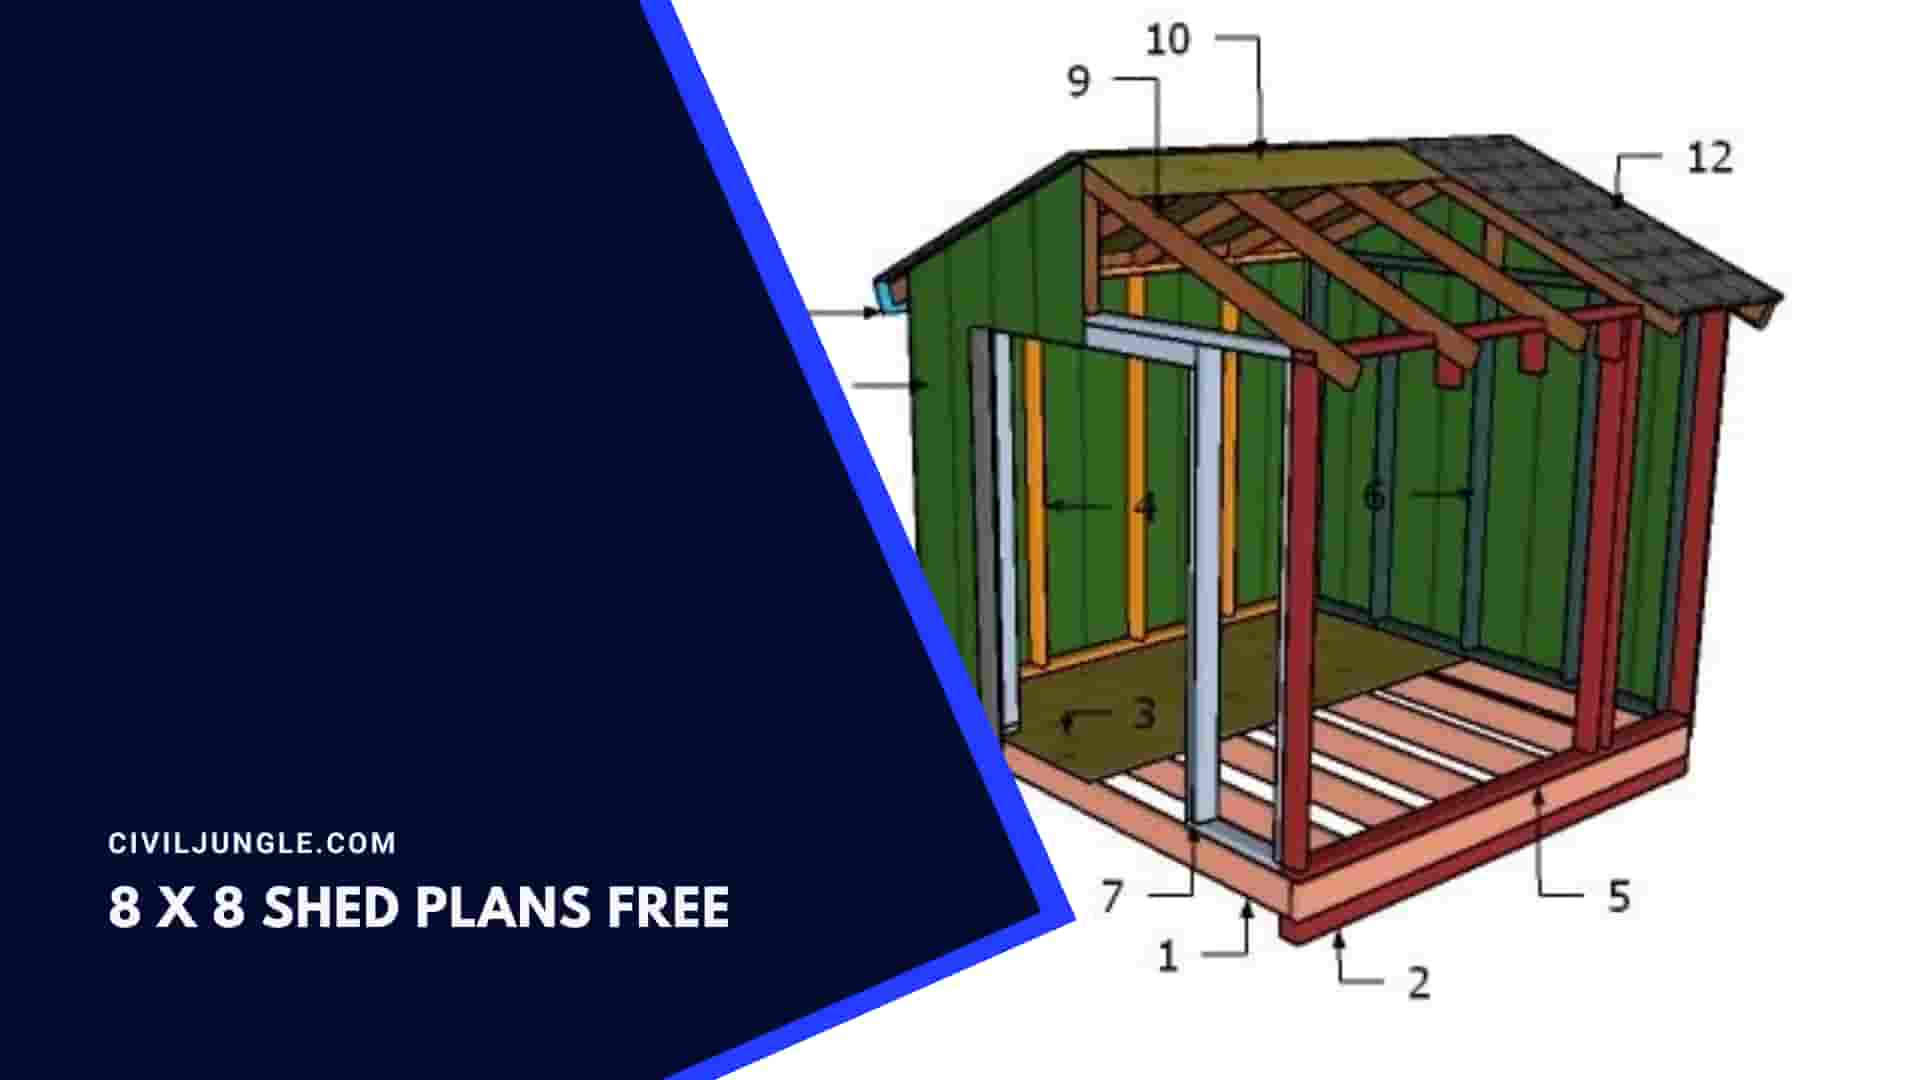 8 X 8 Shed Plans Free